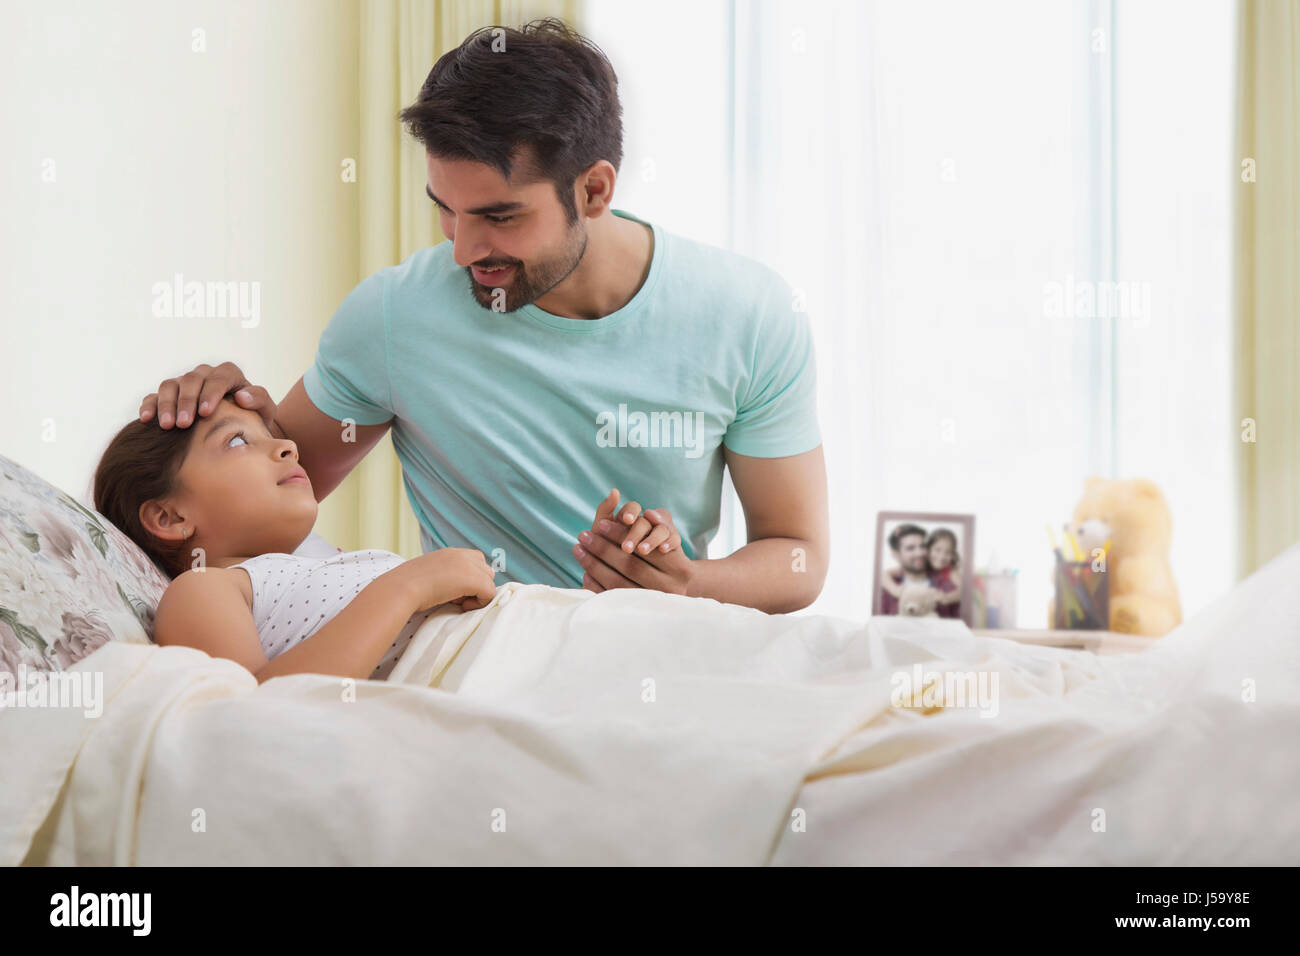 Father checking temperature of sick daughter Stock Photo